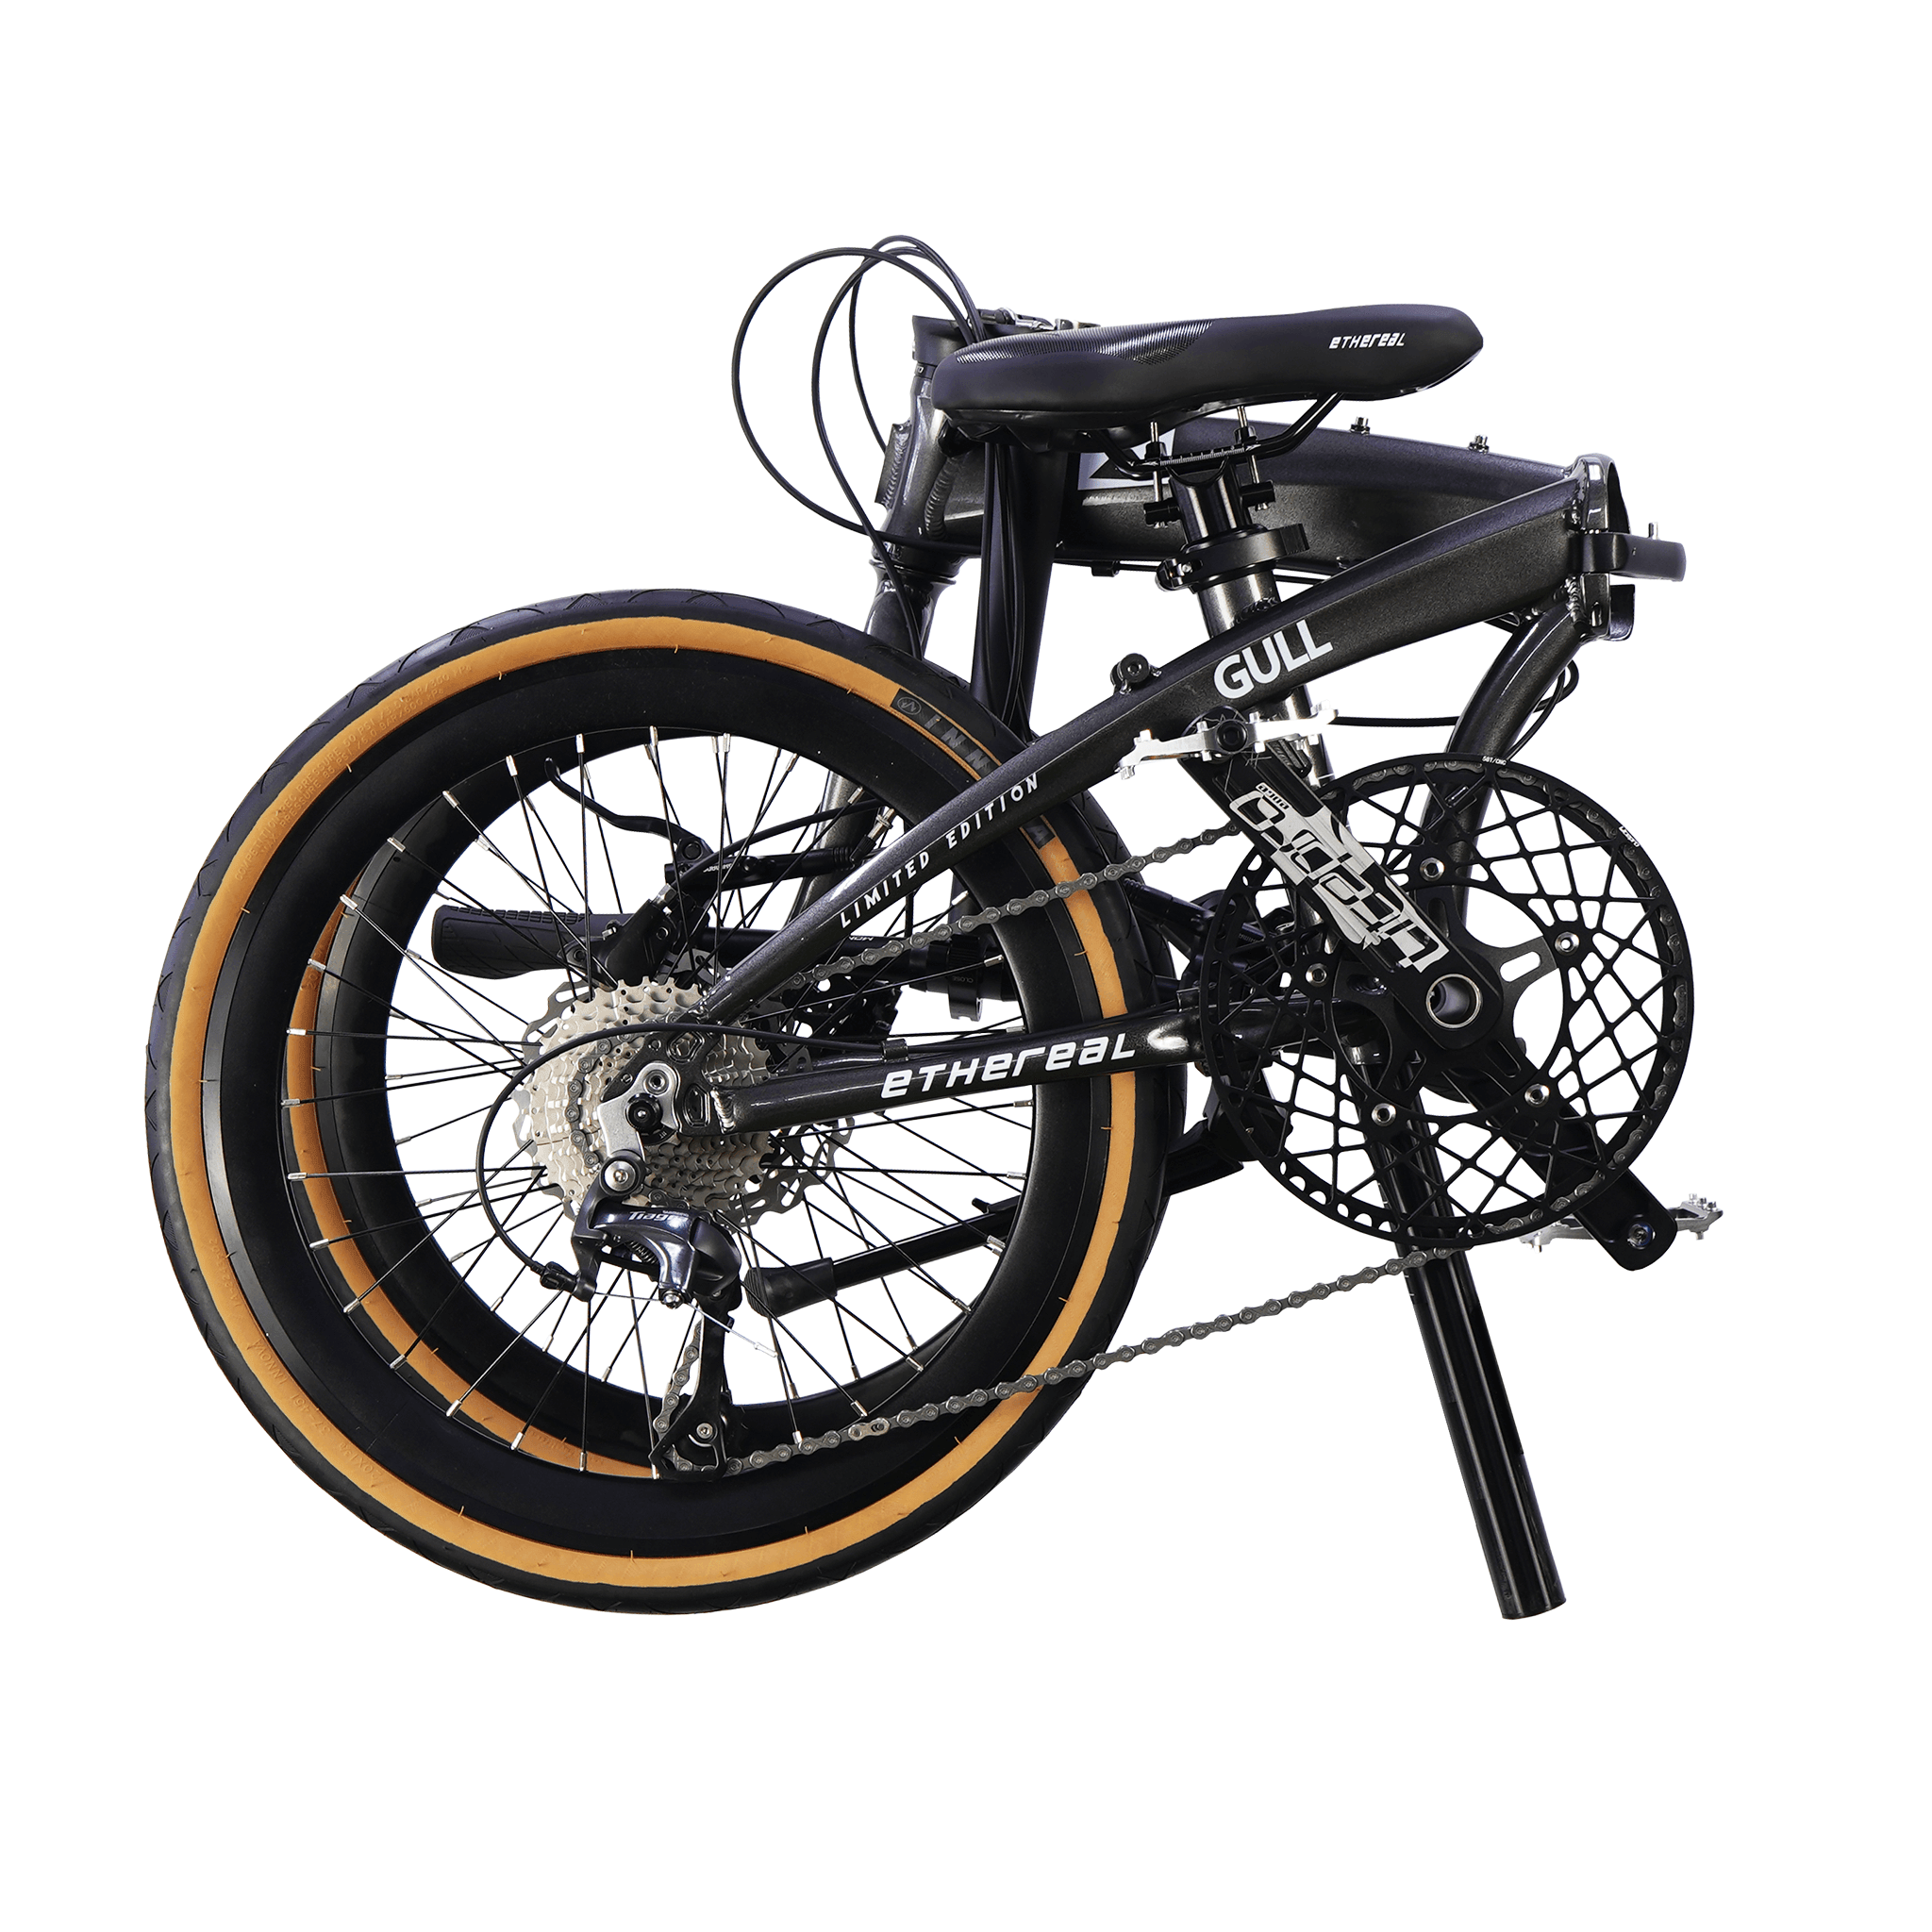 Experience the ultimate ride with the Ethereal Gull foldable bicycle - top-of-the-line quality with premium components, including Shimano Tiagra 10-speed derailleur, Shimano MT200 full hydraulic disc brakes, and lightweight carbon wheelset - The Bike Atrium - Best Bicycle Shop in Singapore